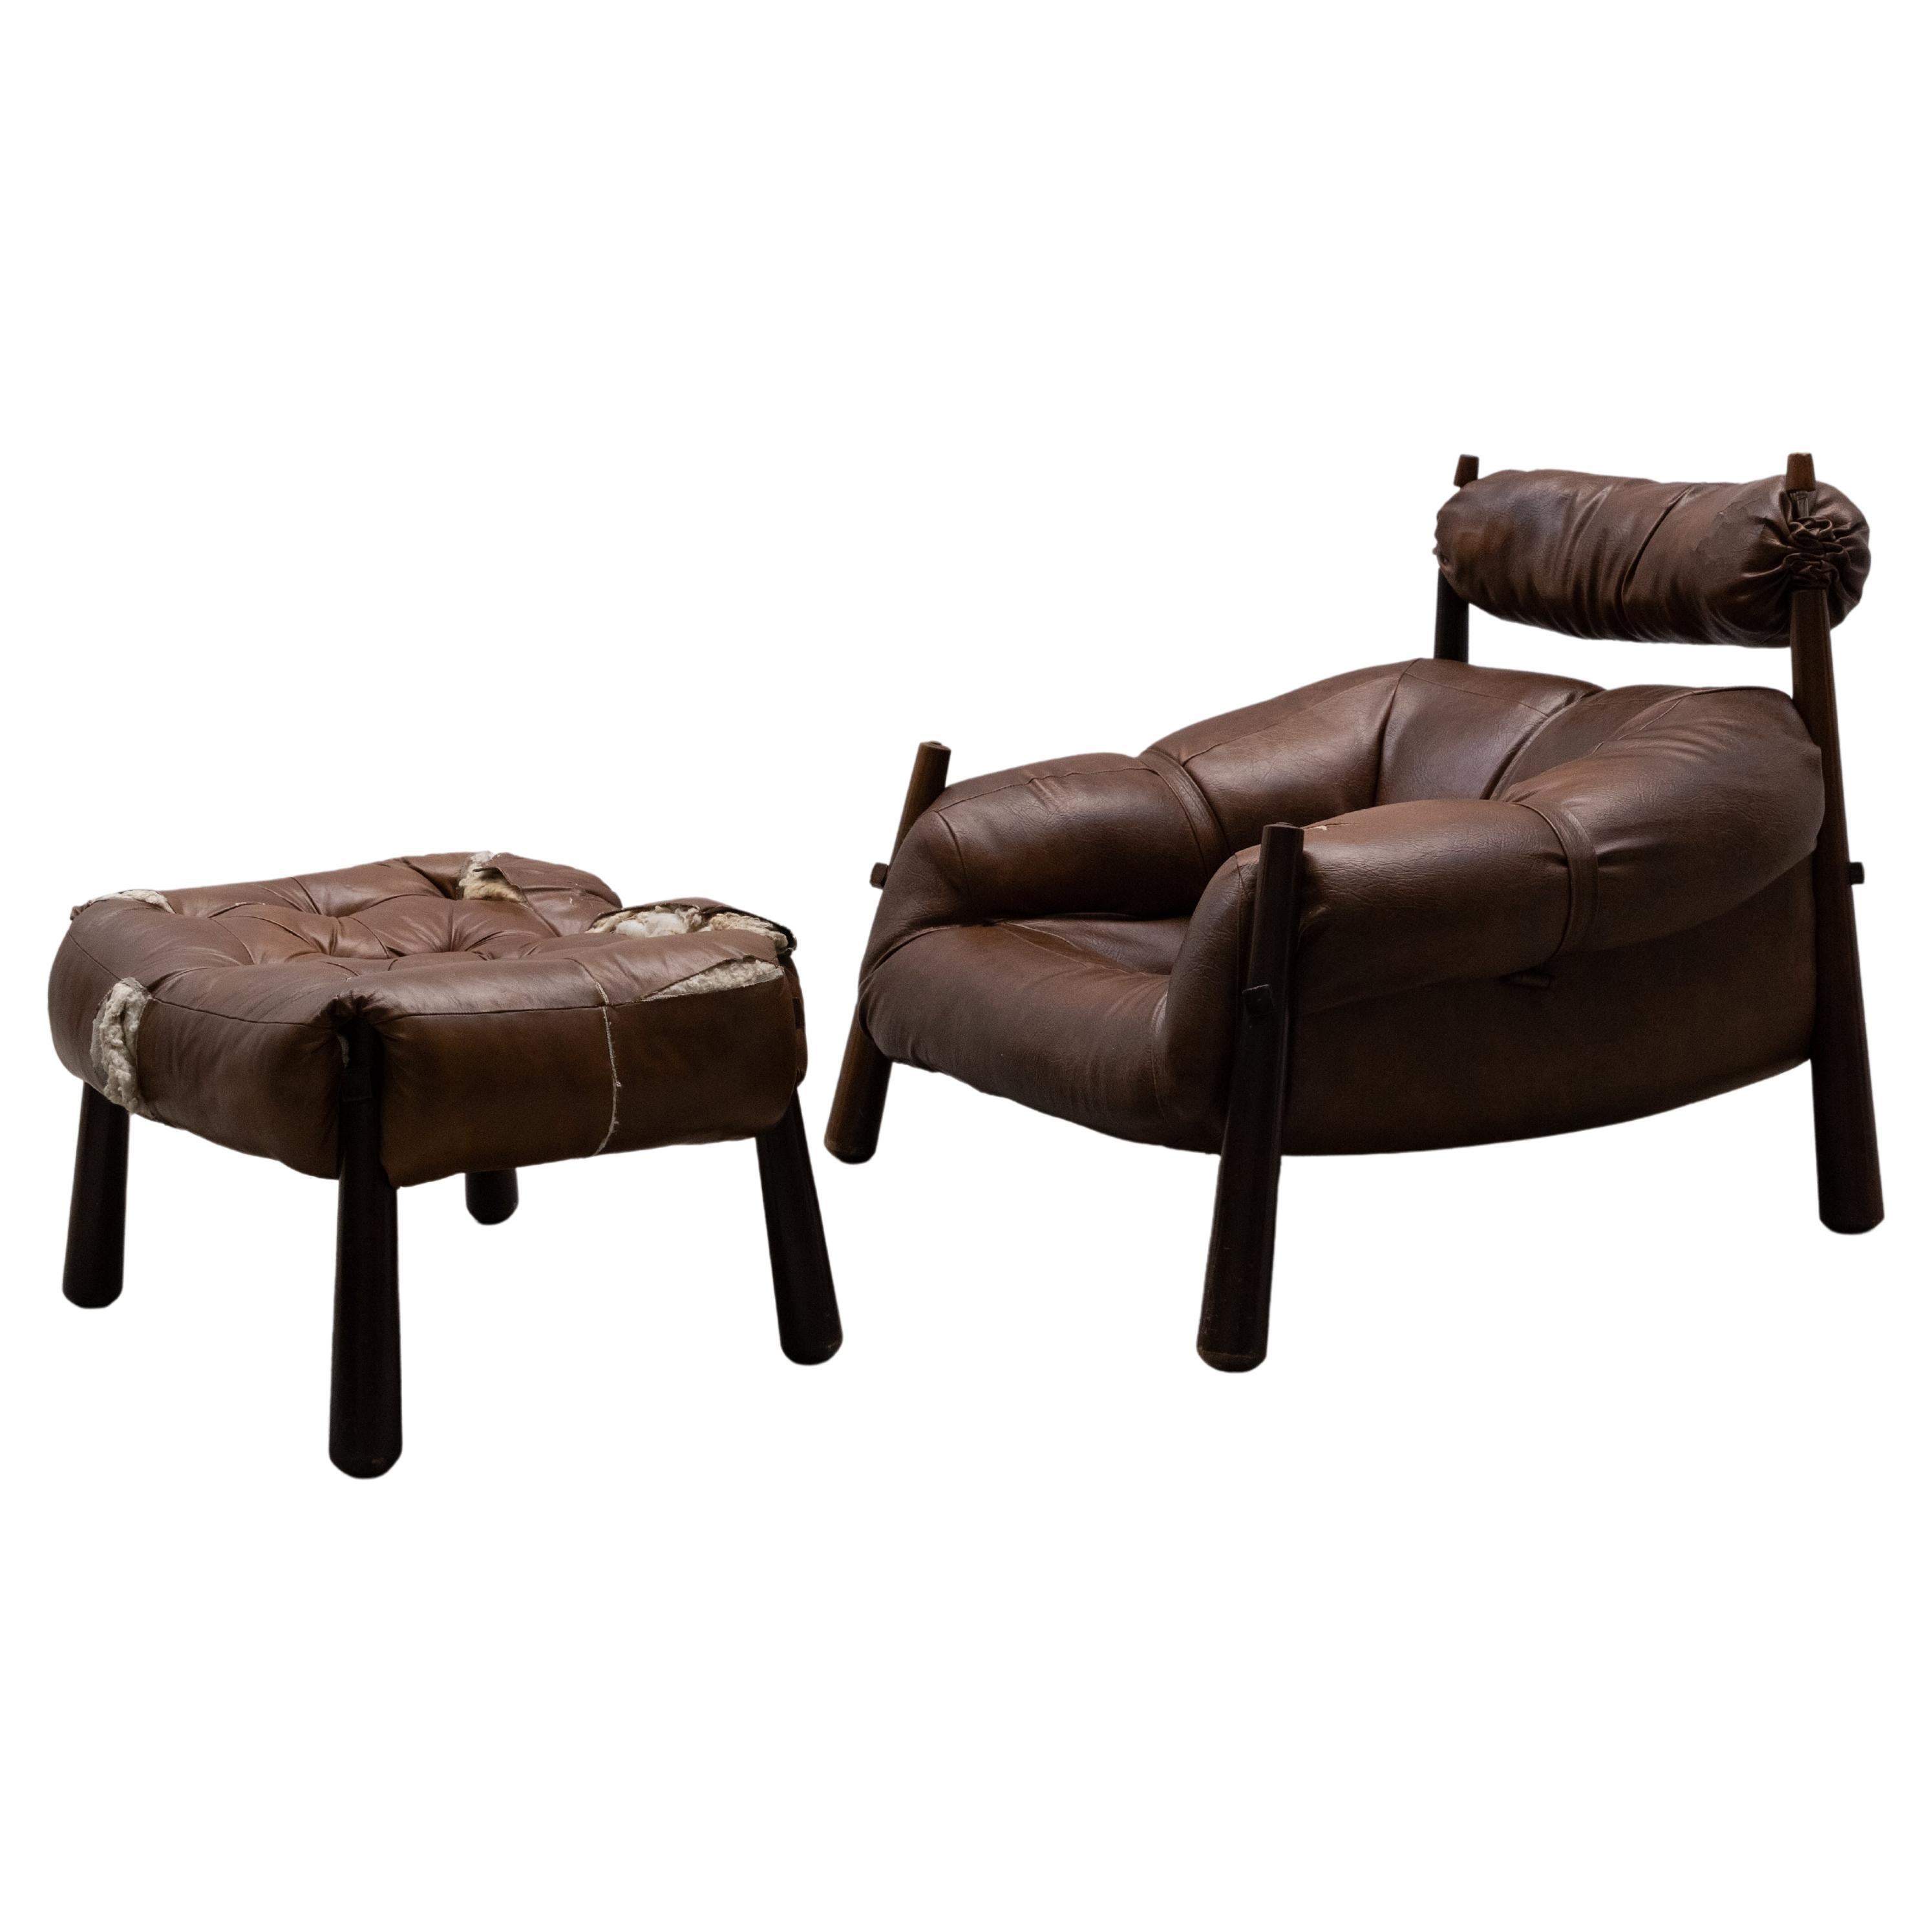 Rare MP-81 Lounge Chair and Ottoman In Original Leather by Percival Lafer, 1970 For Sale